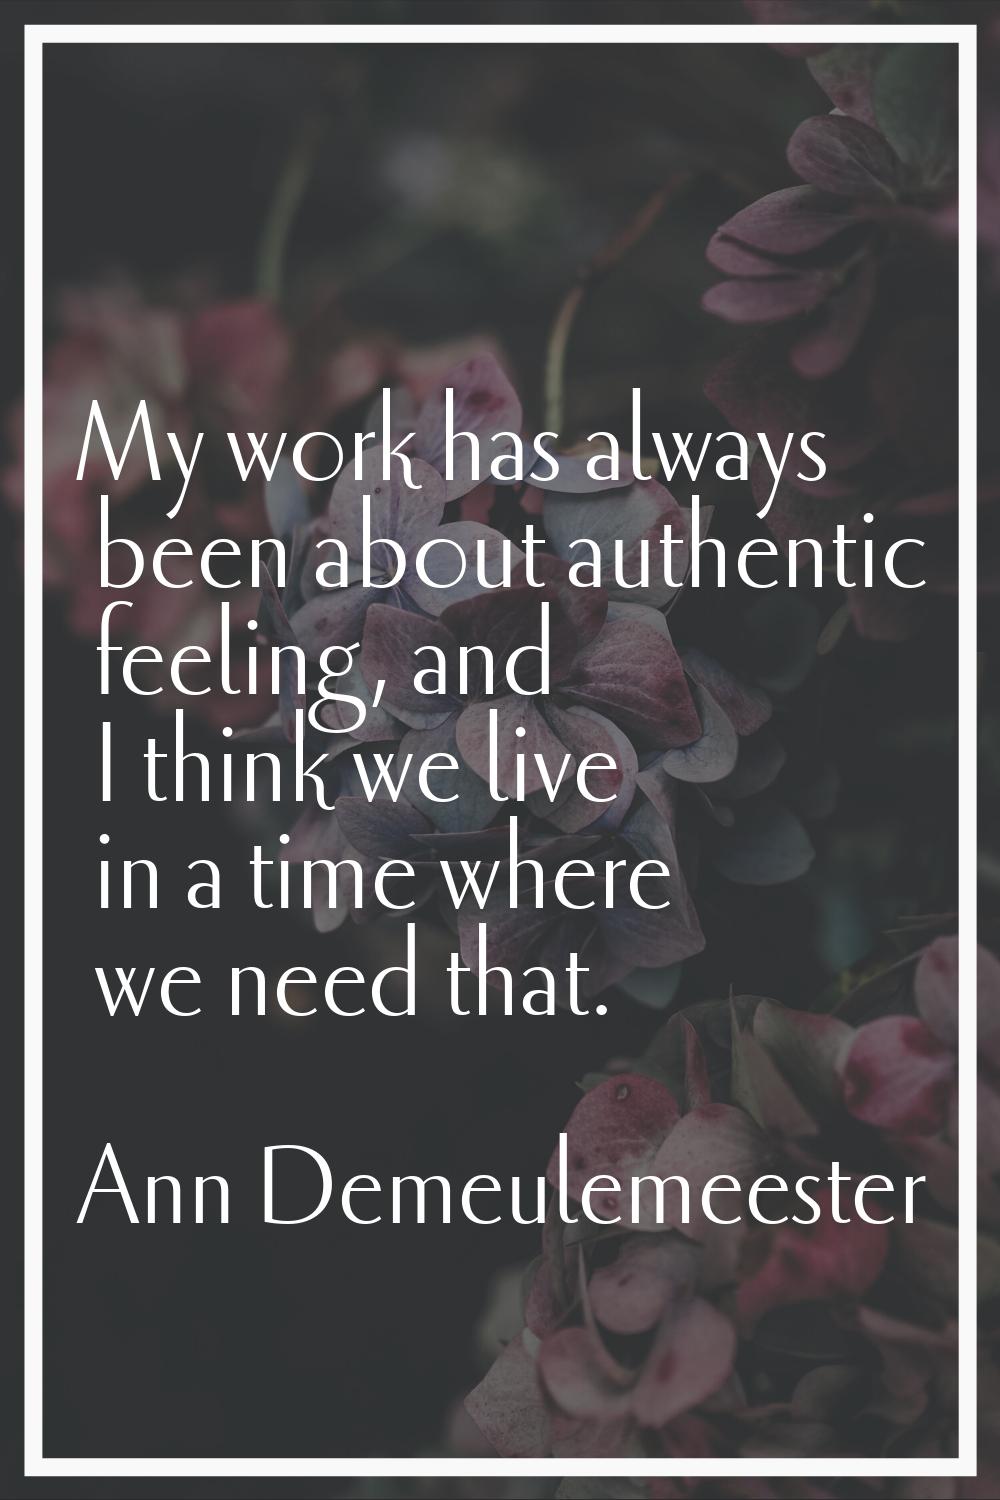 My work has always been about authentic feeling, and I think we live in a time where we need that.